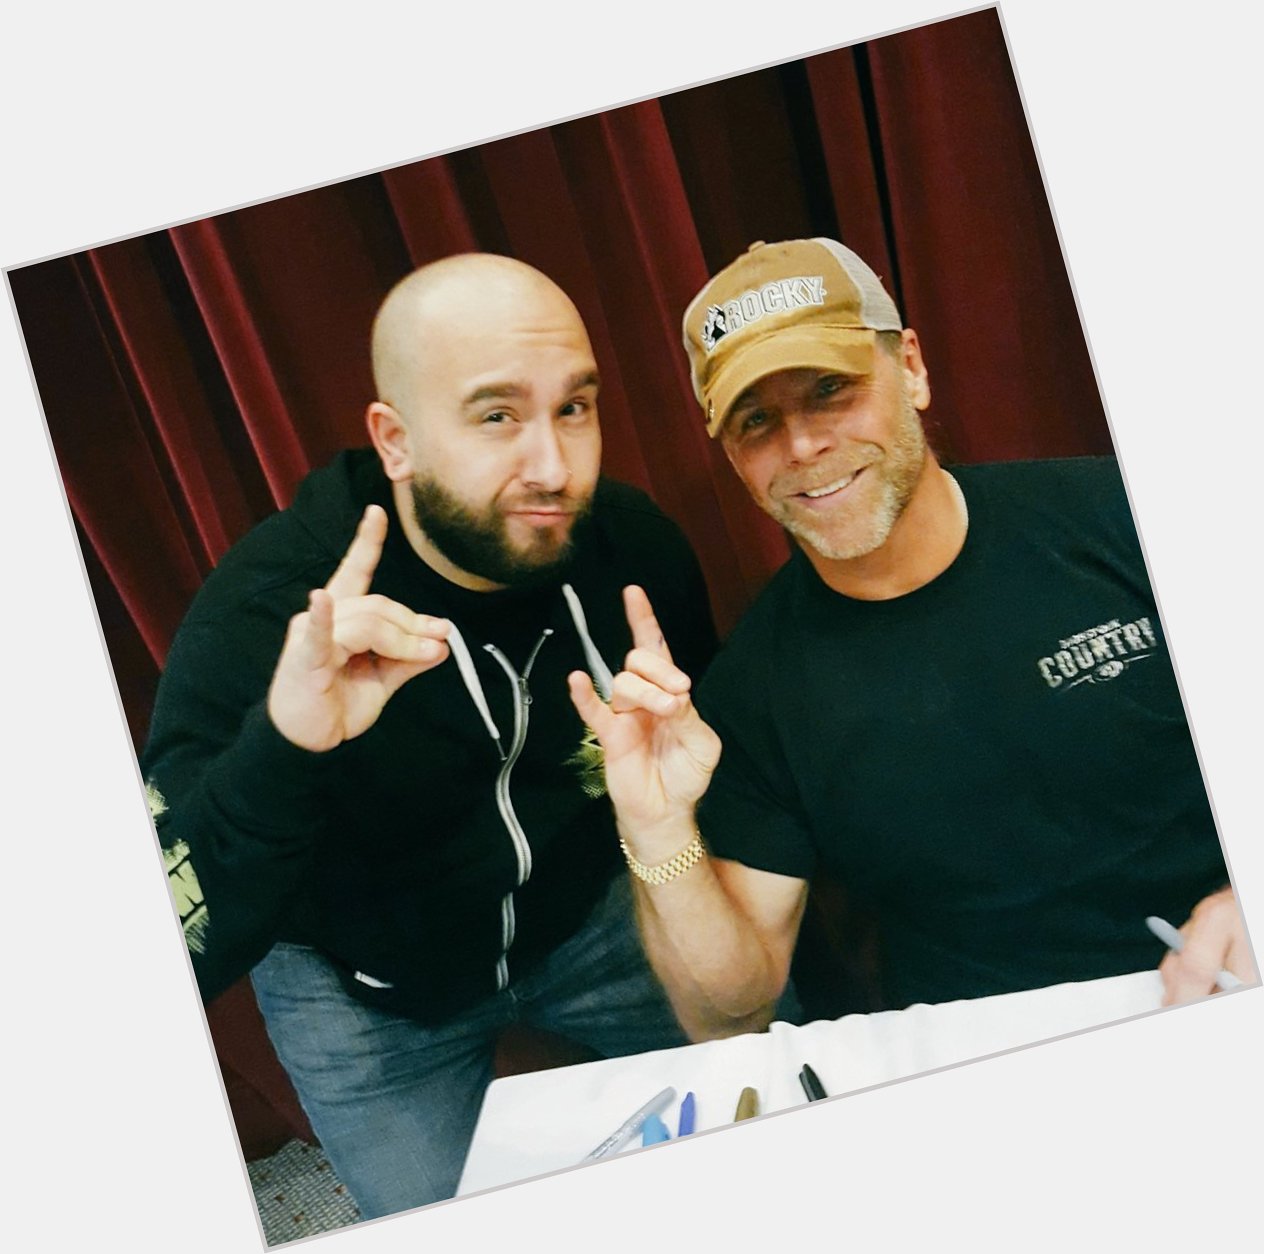 Happy Birthday to one of the greatest of all time, and one of my personal favorites Shawn Michaels 